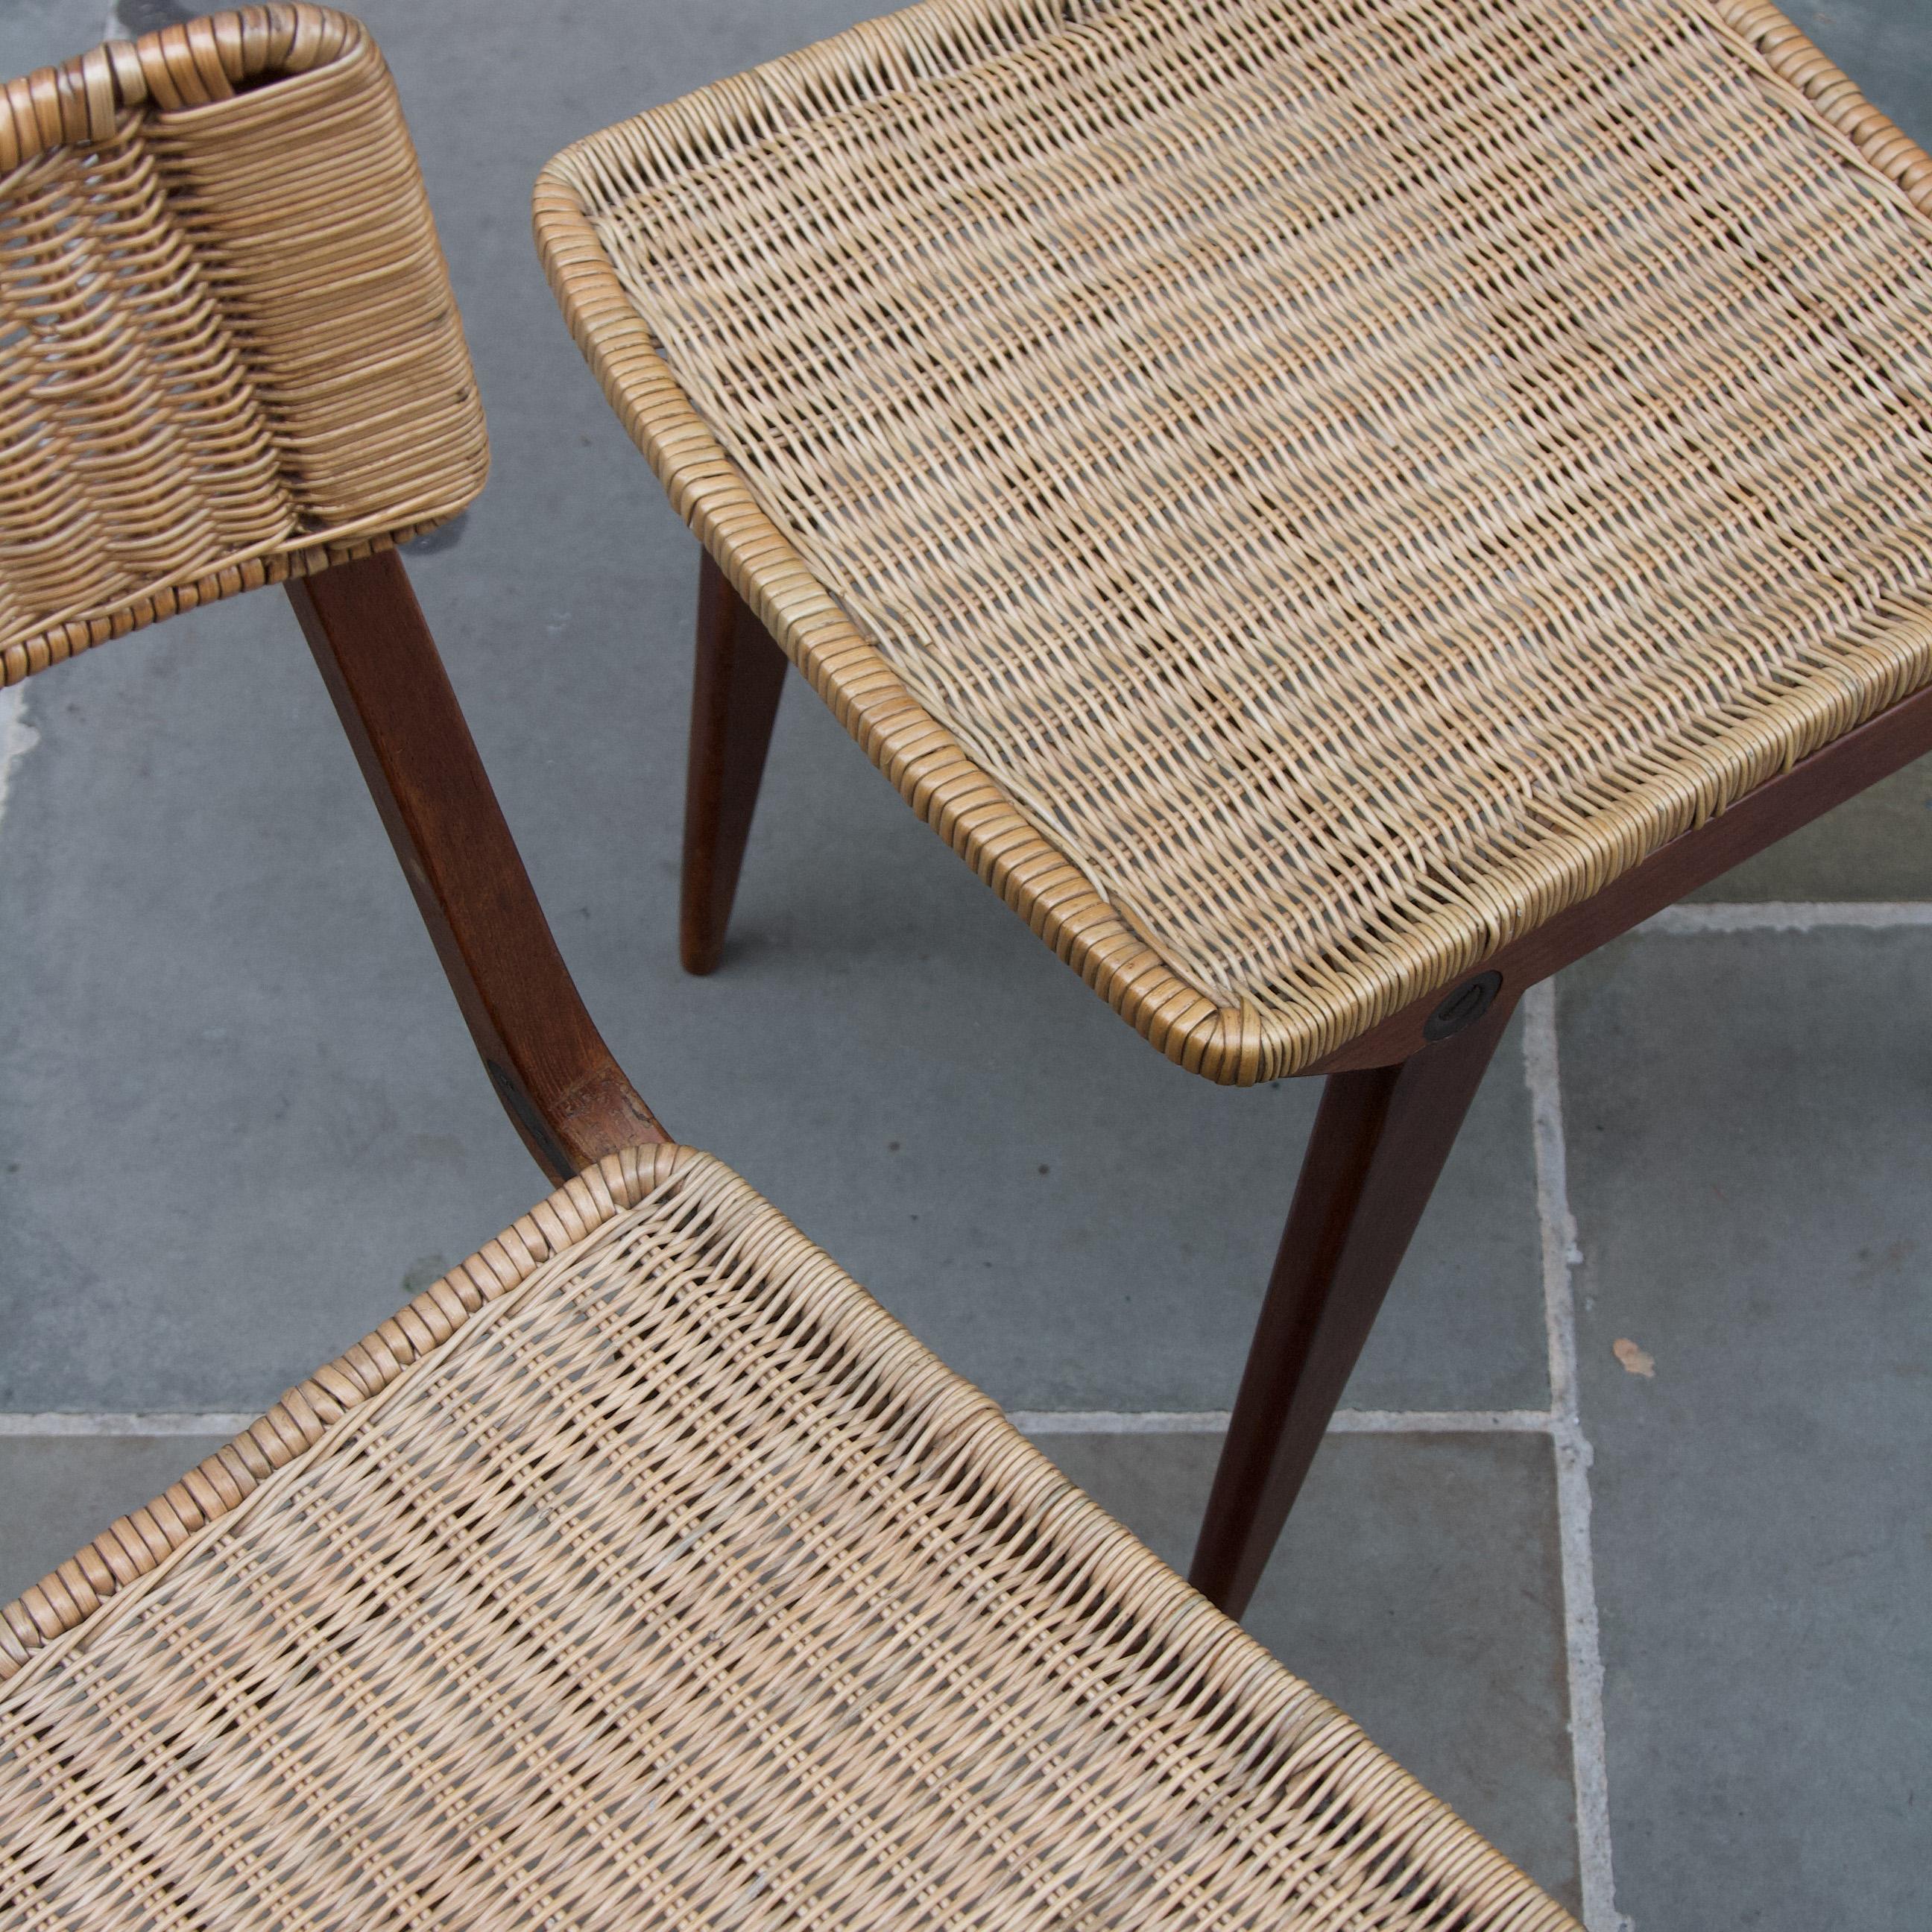 20th Century Pair of Teak and Wicker Chairs, French, 1950s